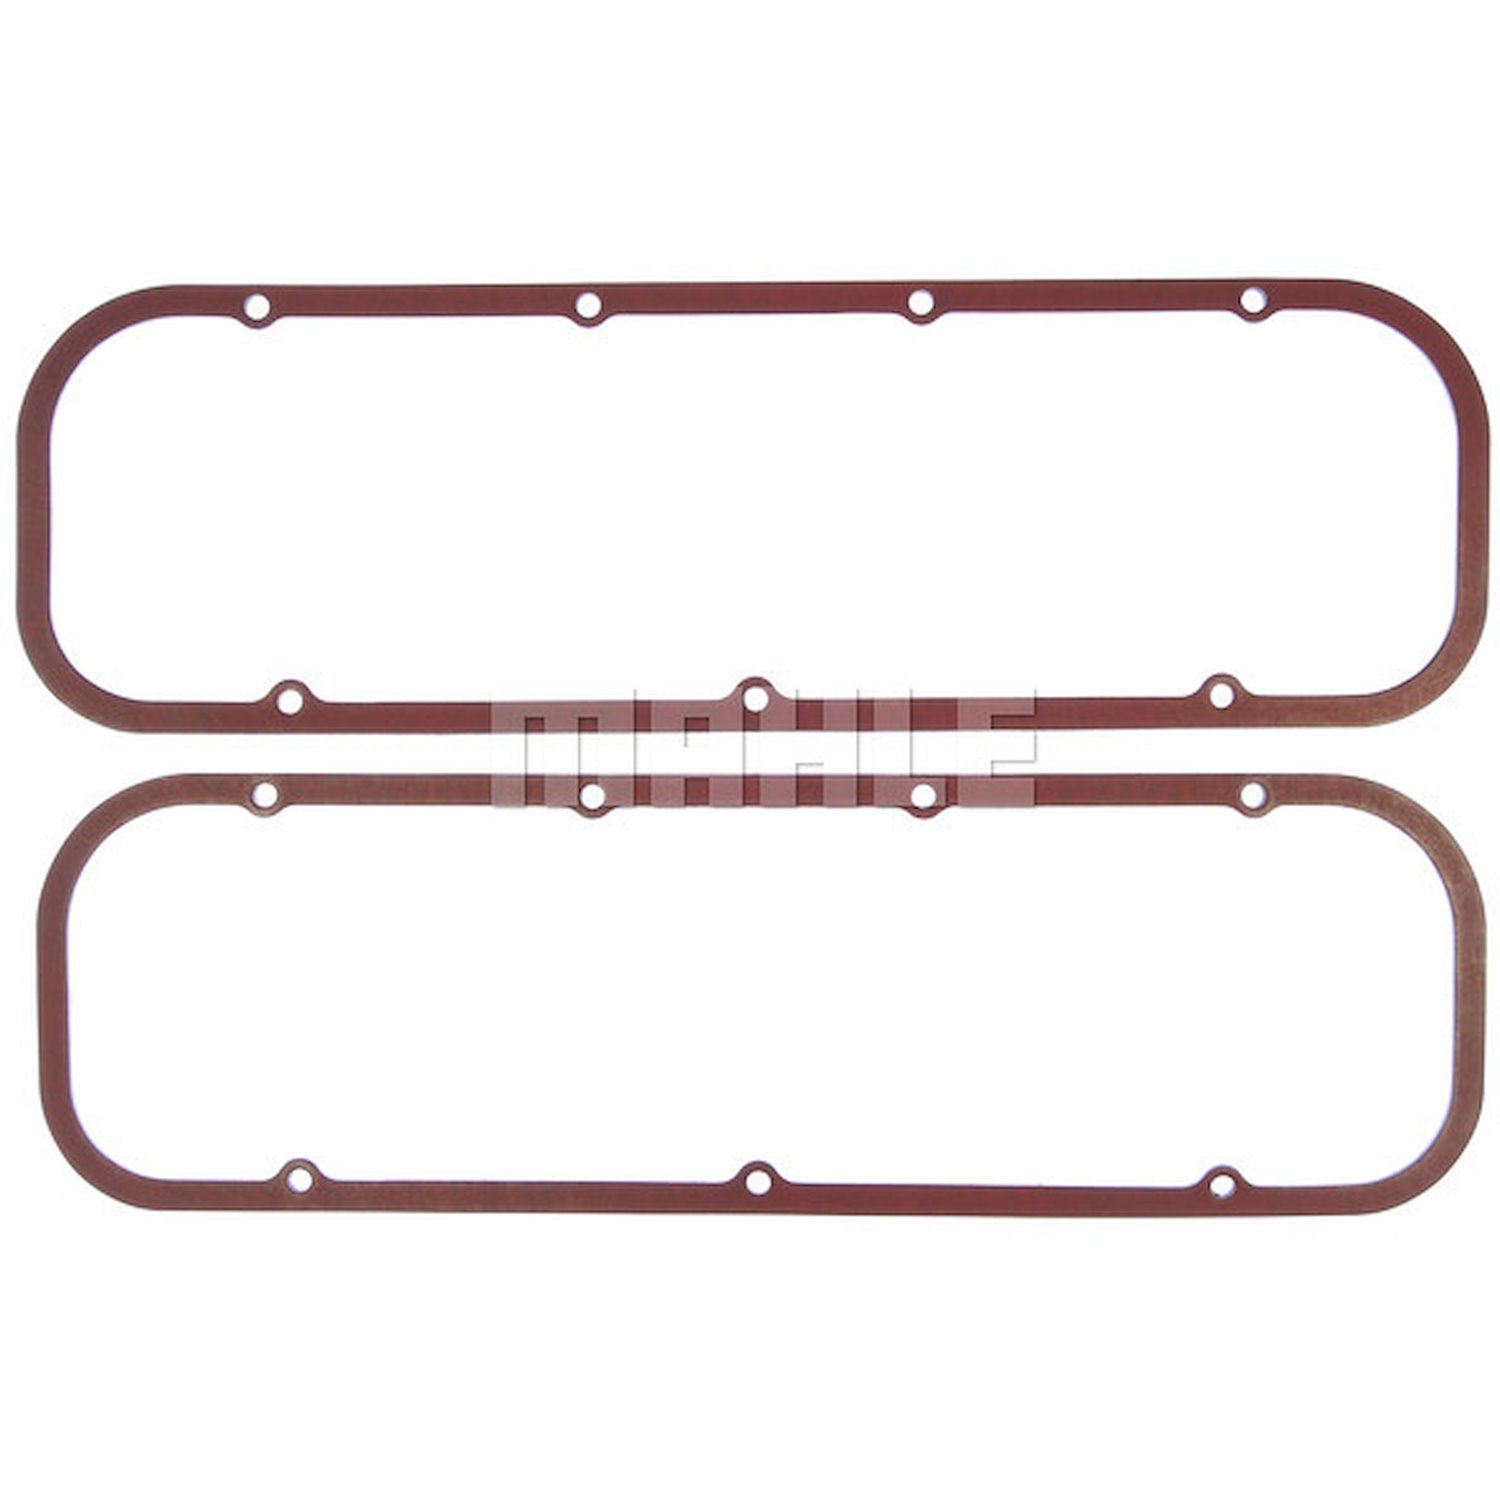 Valve Cover Gasket Set for Big Block Chevy